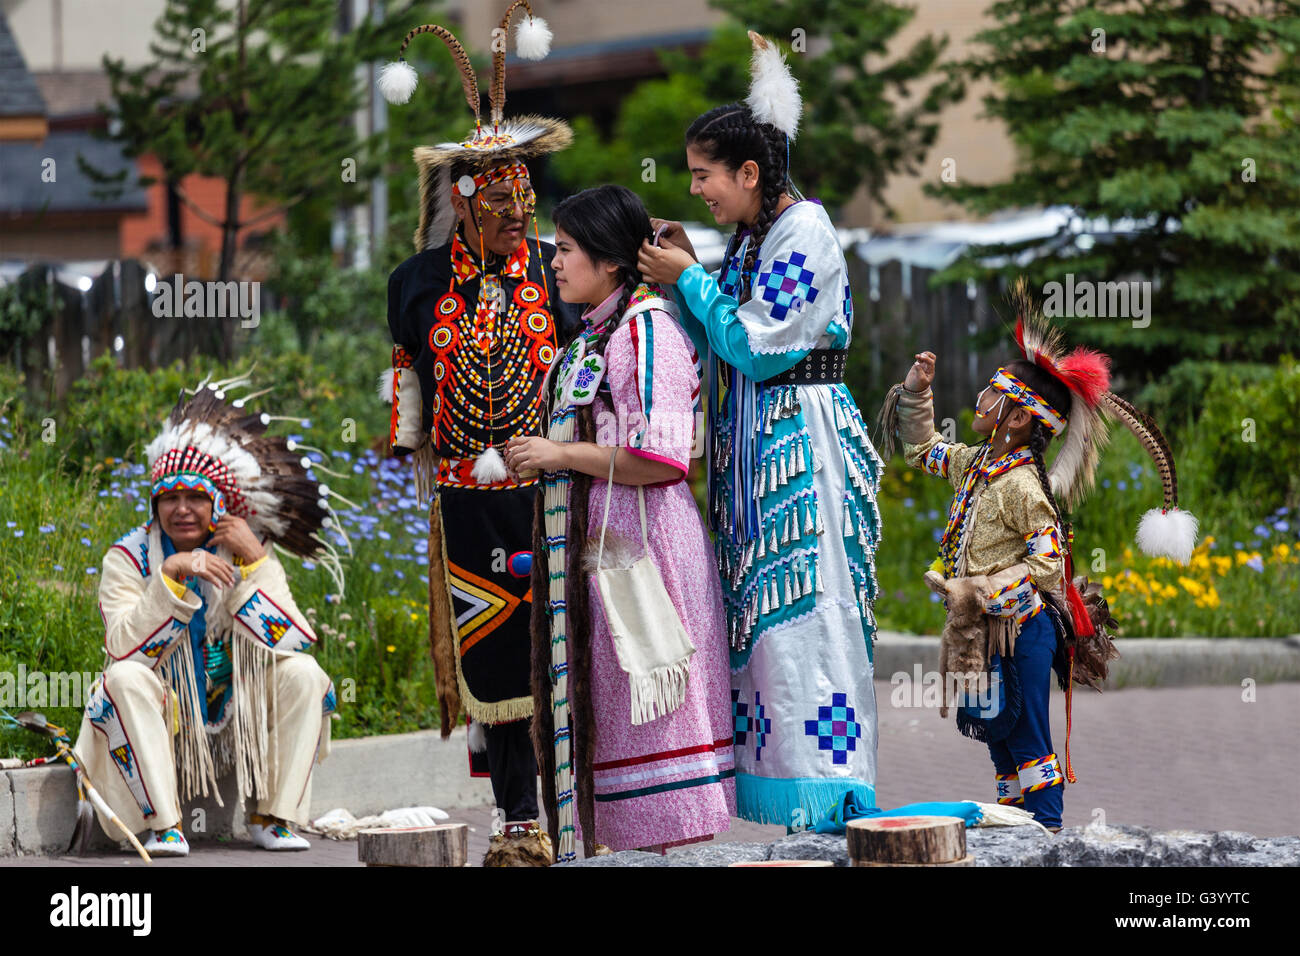 BANFF, CANADA - JUL 3: Young native Blackfoot Indian dancers put the finishing touches on their costumes for a performance. Stock Photo